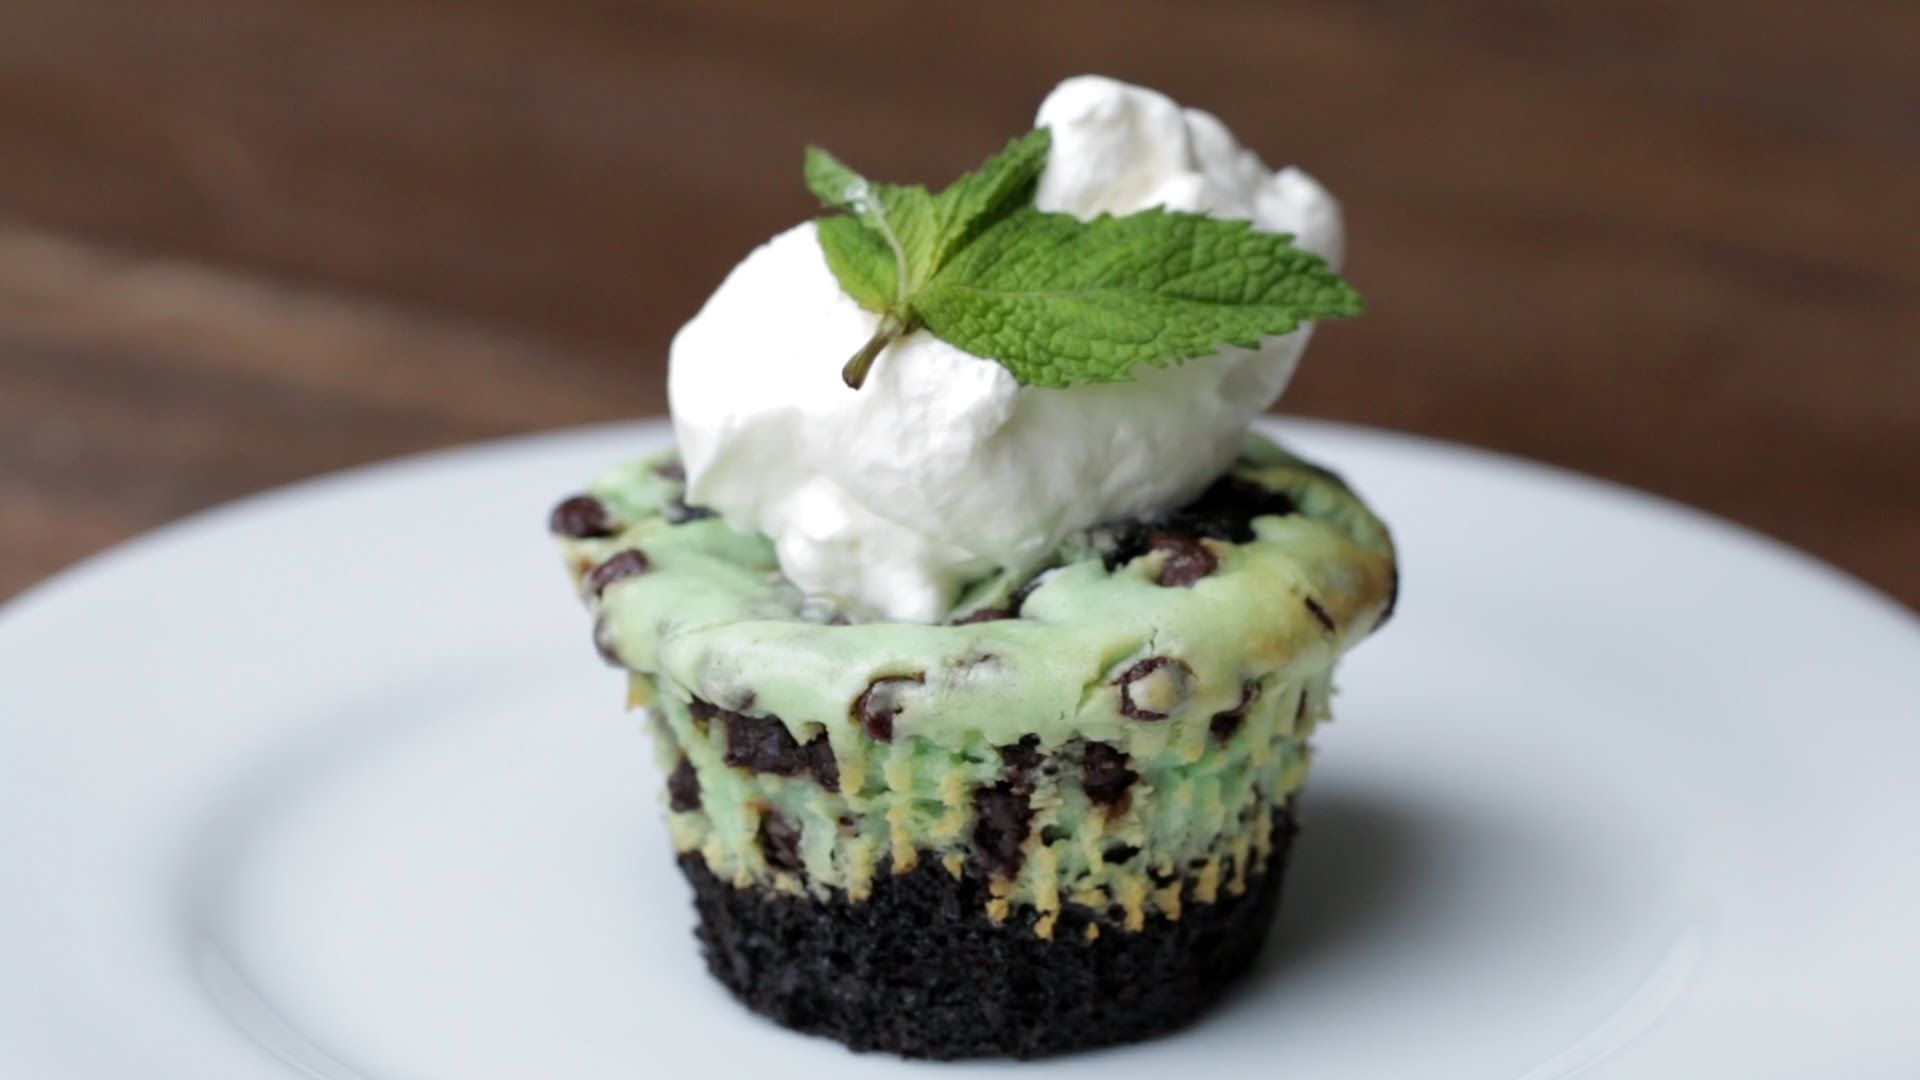 She Combines 3 Different Types Of Desserts In One Cupcake